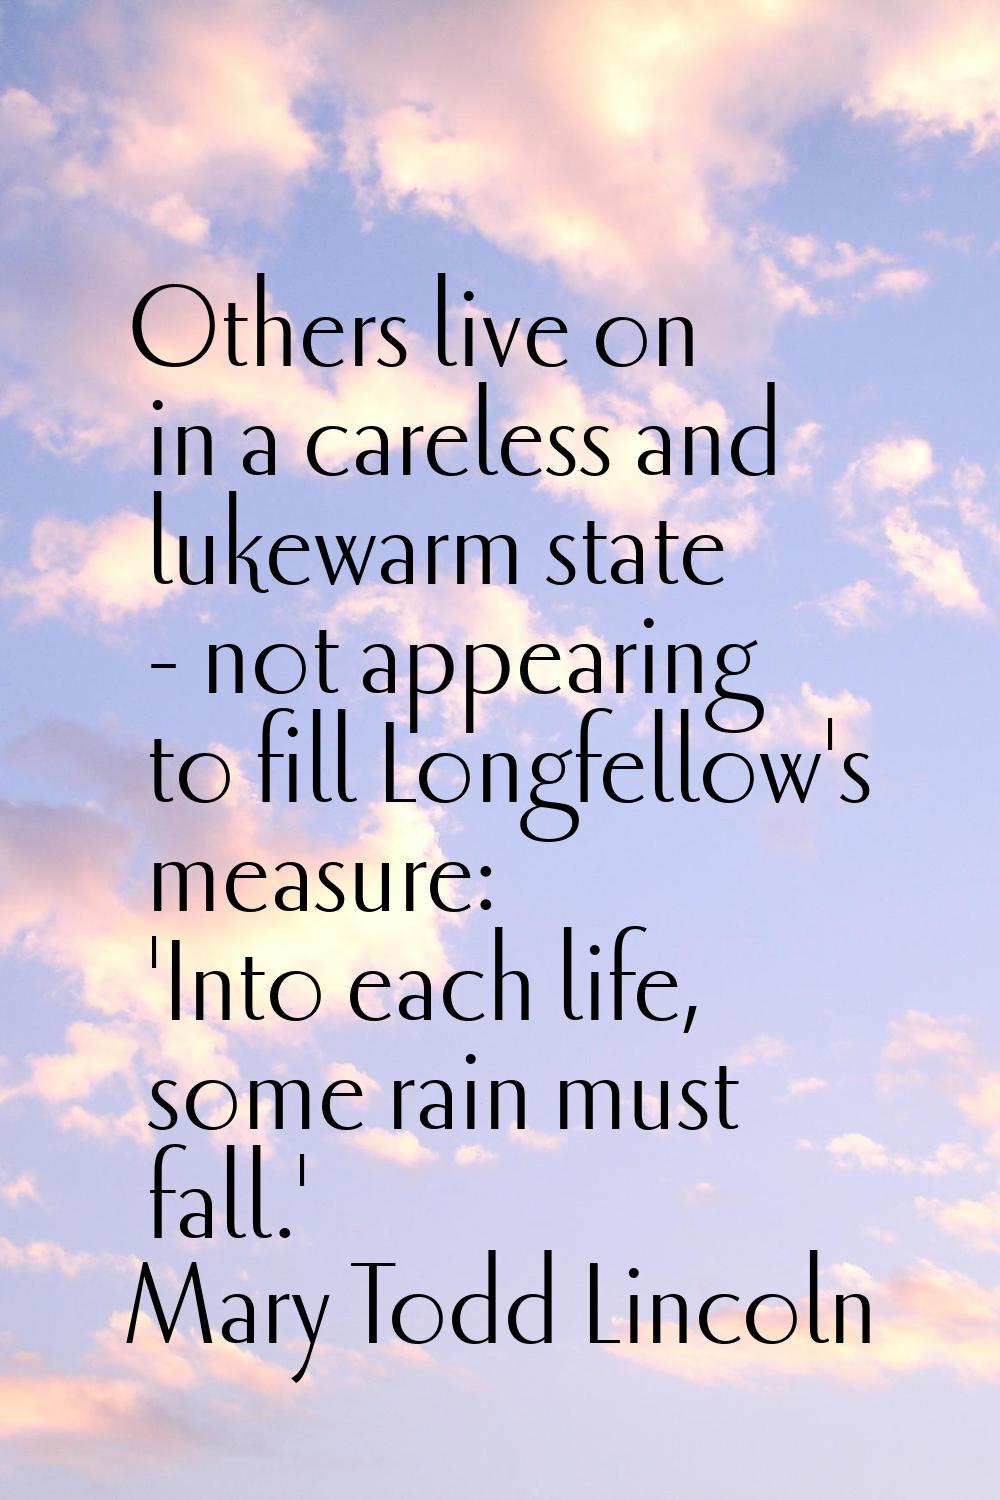 Others live on in a careless and lukewarm state - not appearing to fill Longfellow's measure: 'Into